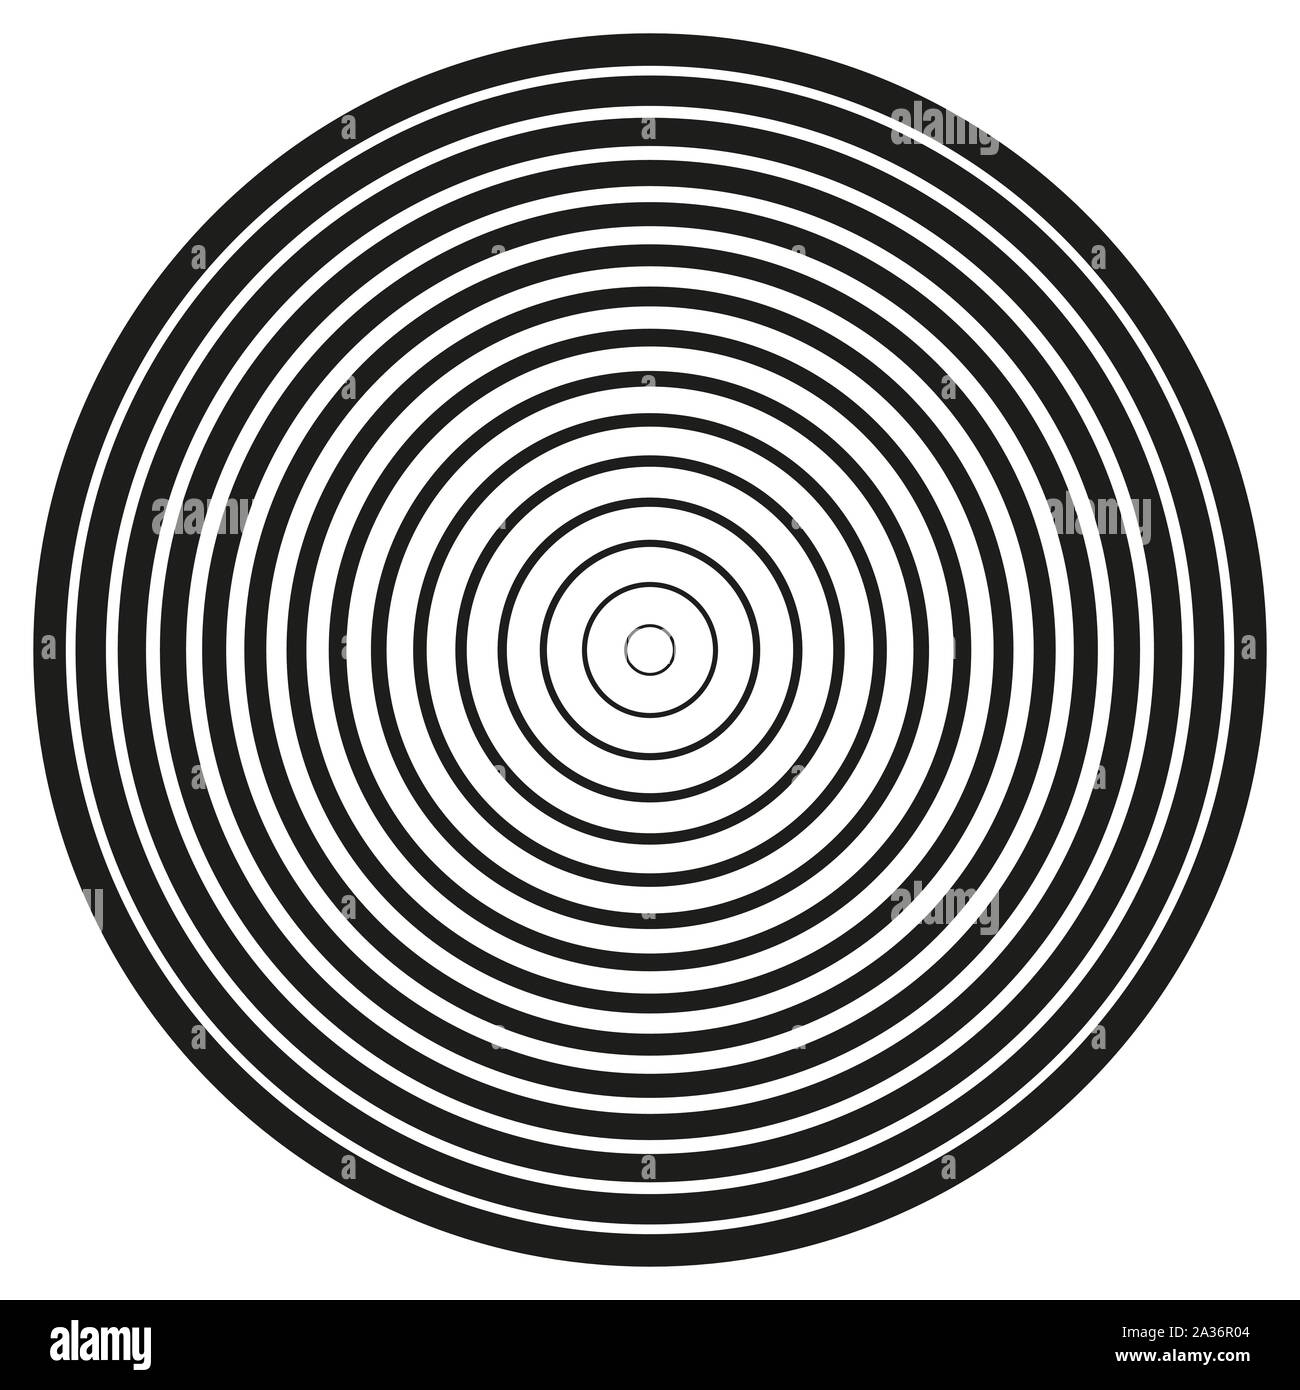 Concentric circle element. Black and white color ring. Abstract vector illustration for sound wave, Monochrome graphic. Stock Vector